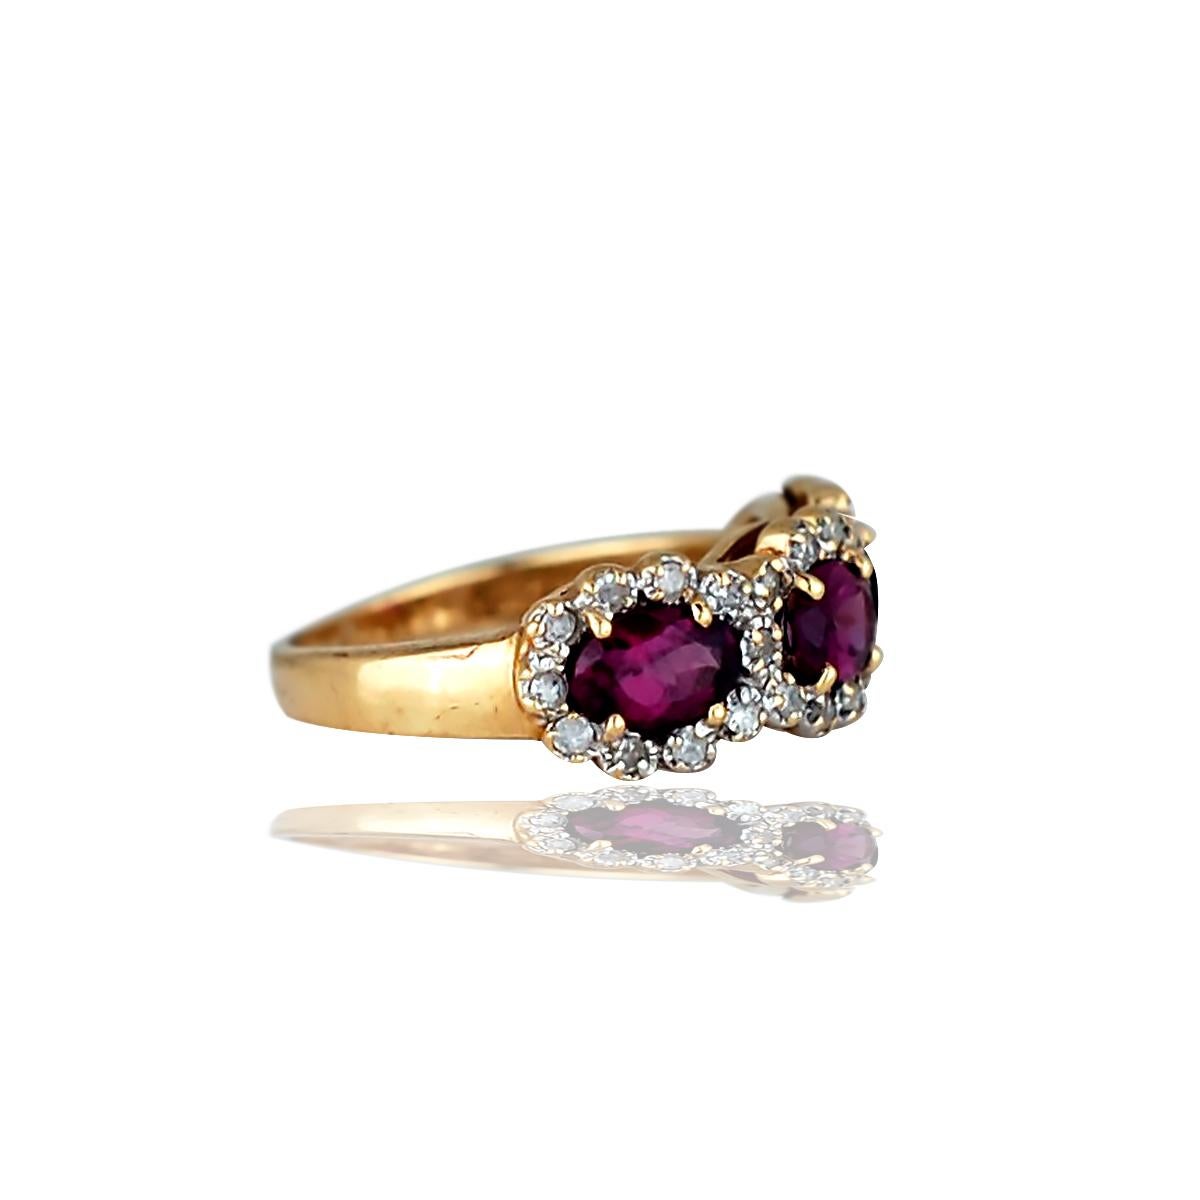 Lovely, 14 karat yellow gold ring features 3 oval cut prong set with pink Rhodolite stones horizontally and surrounded by round brilliant prong set diamond halos. 3 pink Rhodolite stones measure 5.9 mm x 3.95 mm x 2.85 mm and weigh approximately